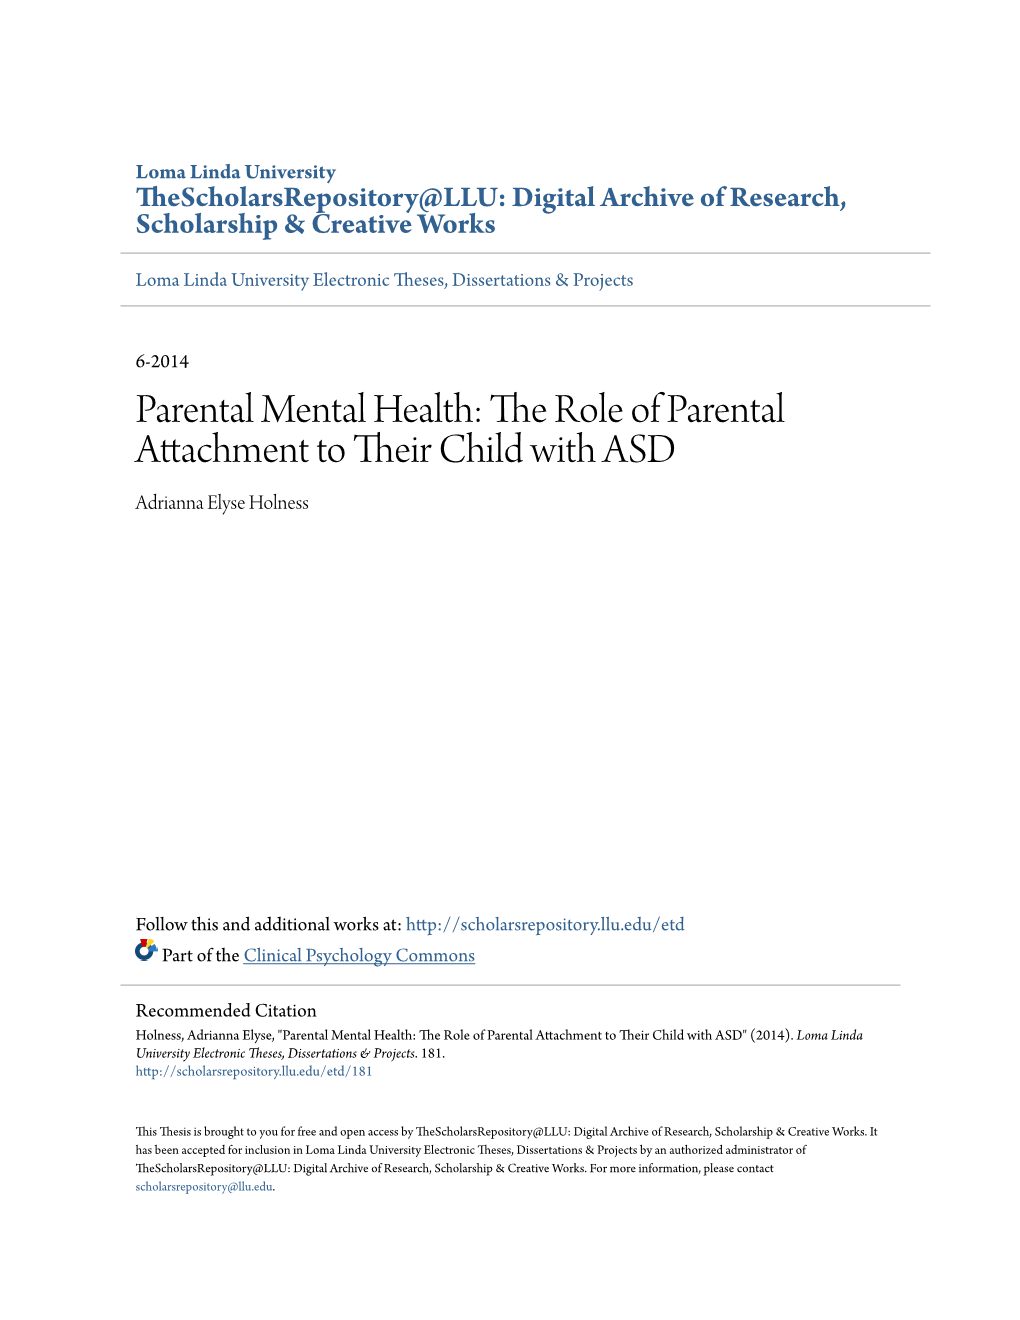 Parental Mental Health: the Role of Parental Attachment to Their Child with ASD